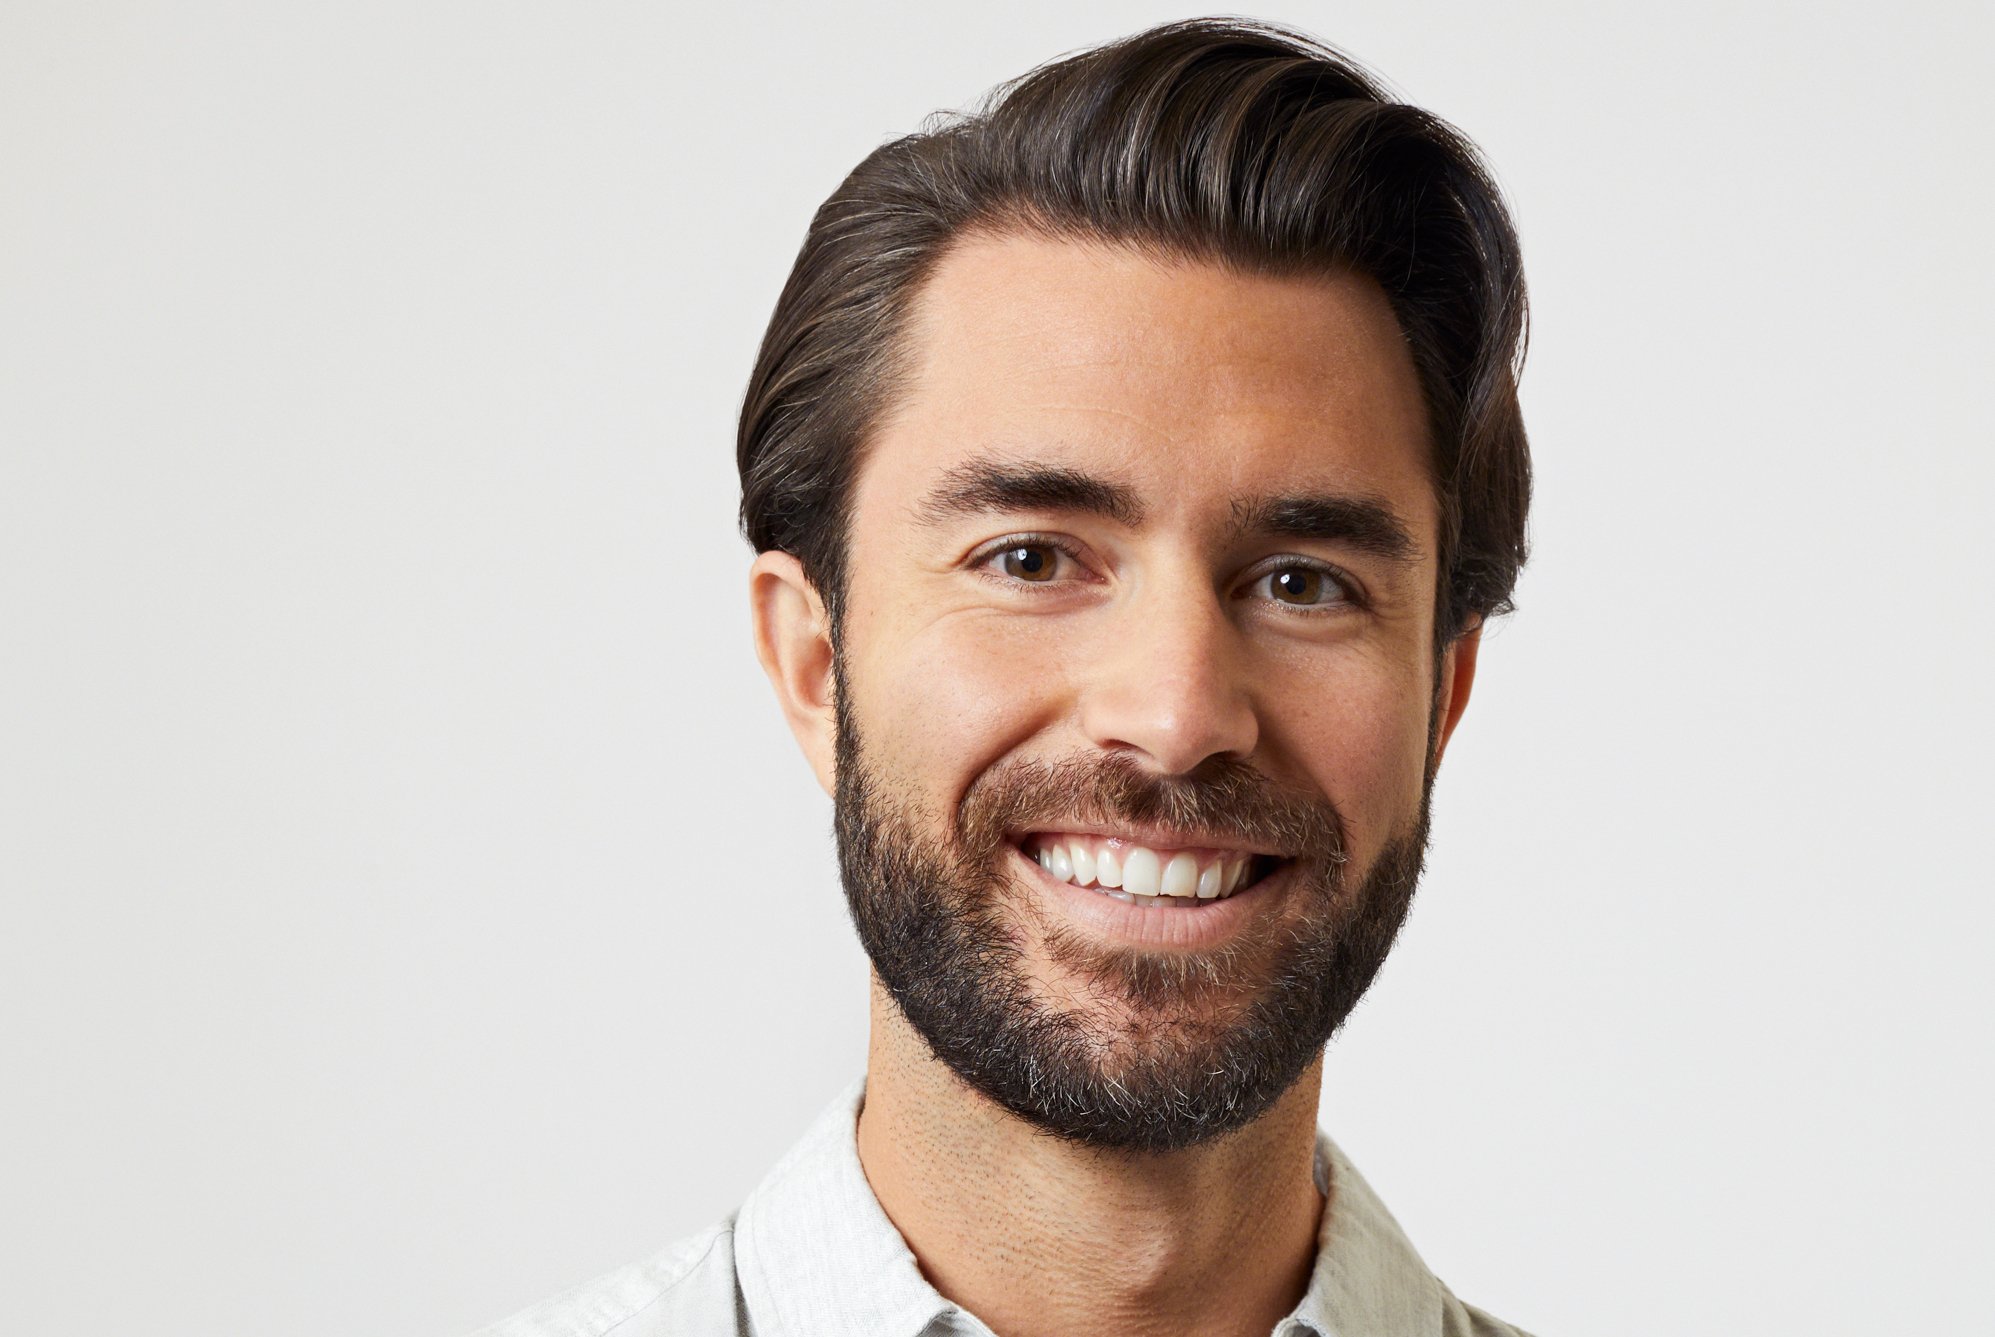 'The Bachelorette' features Justin B., seen here wearing a white collared shirt.